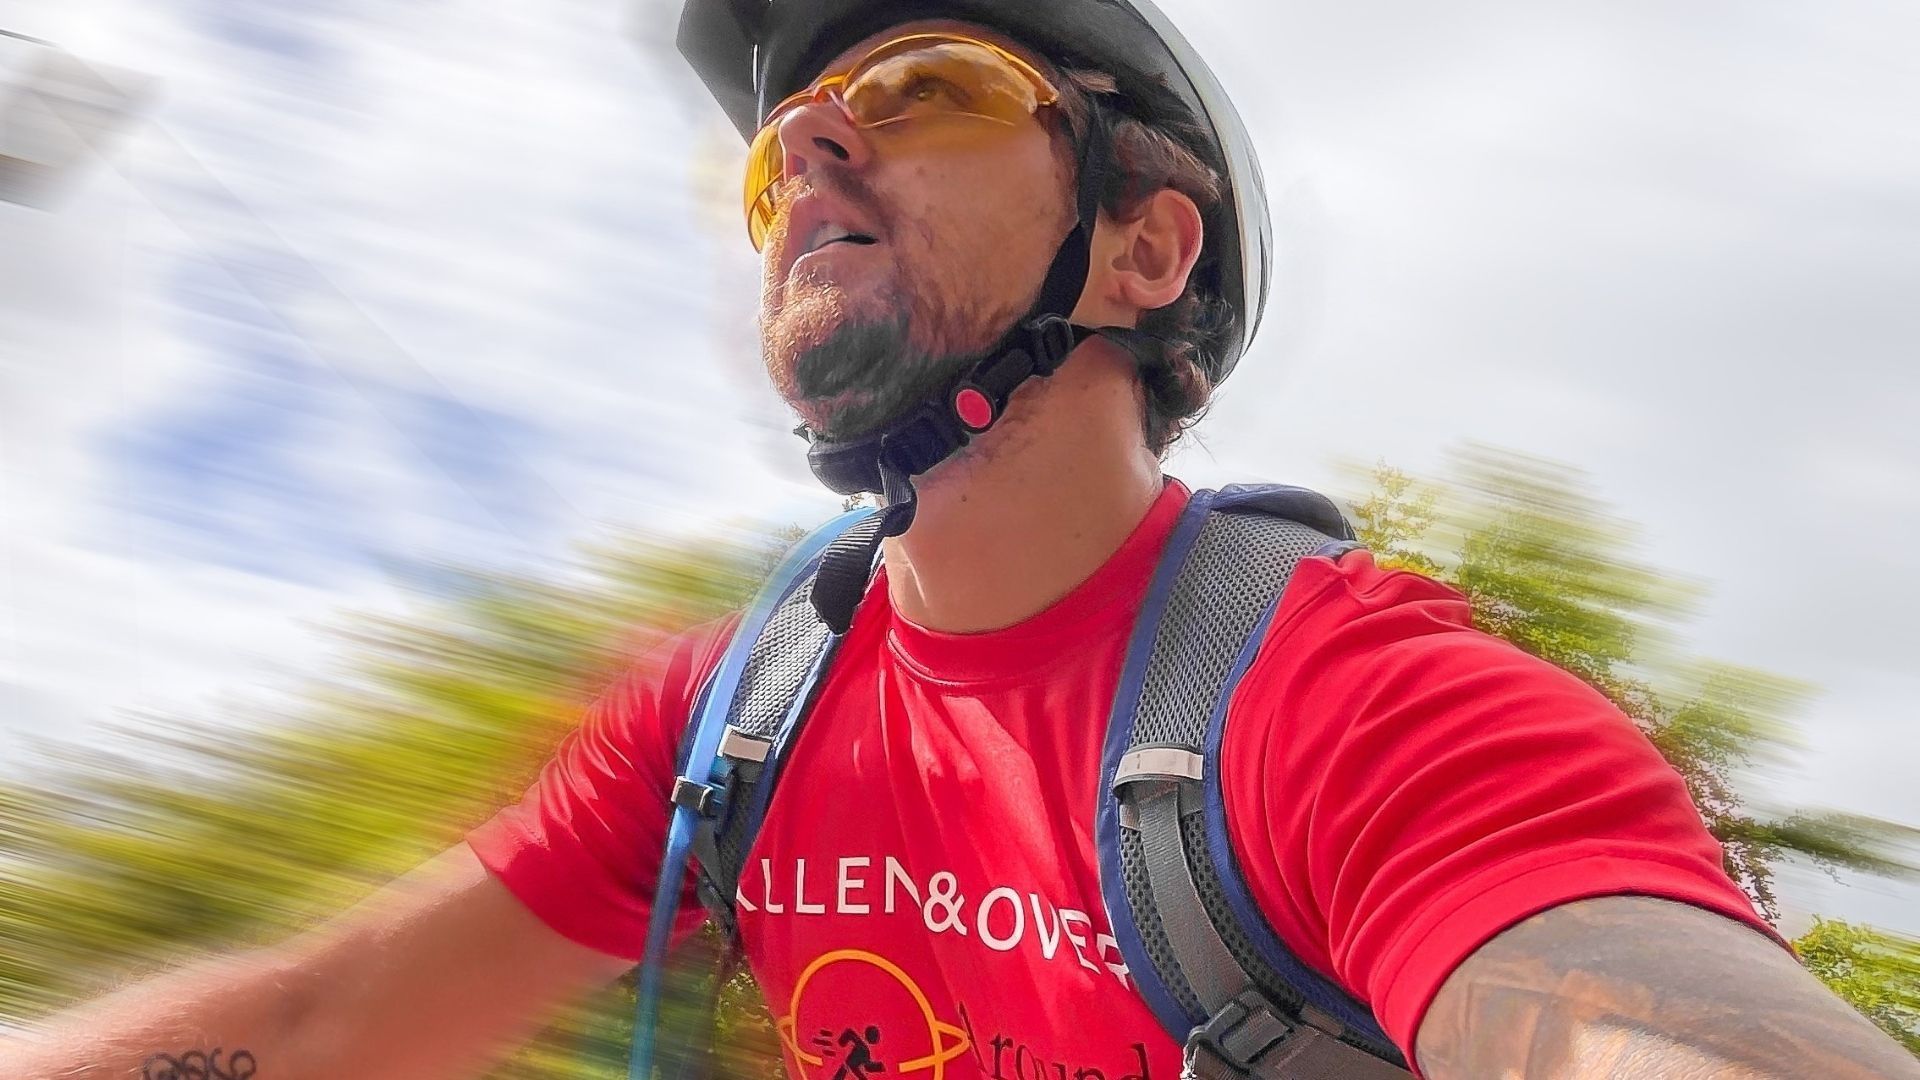 A male cyclist participating in the Allen and Overy round the world challenge